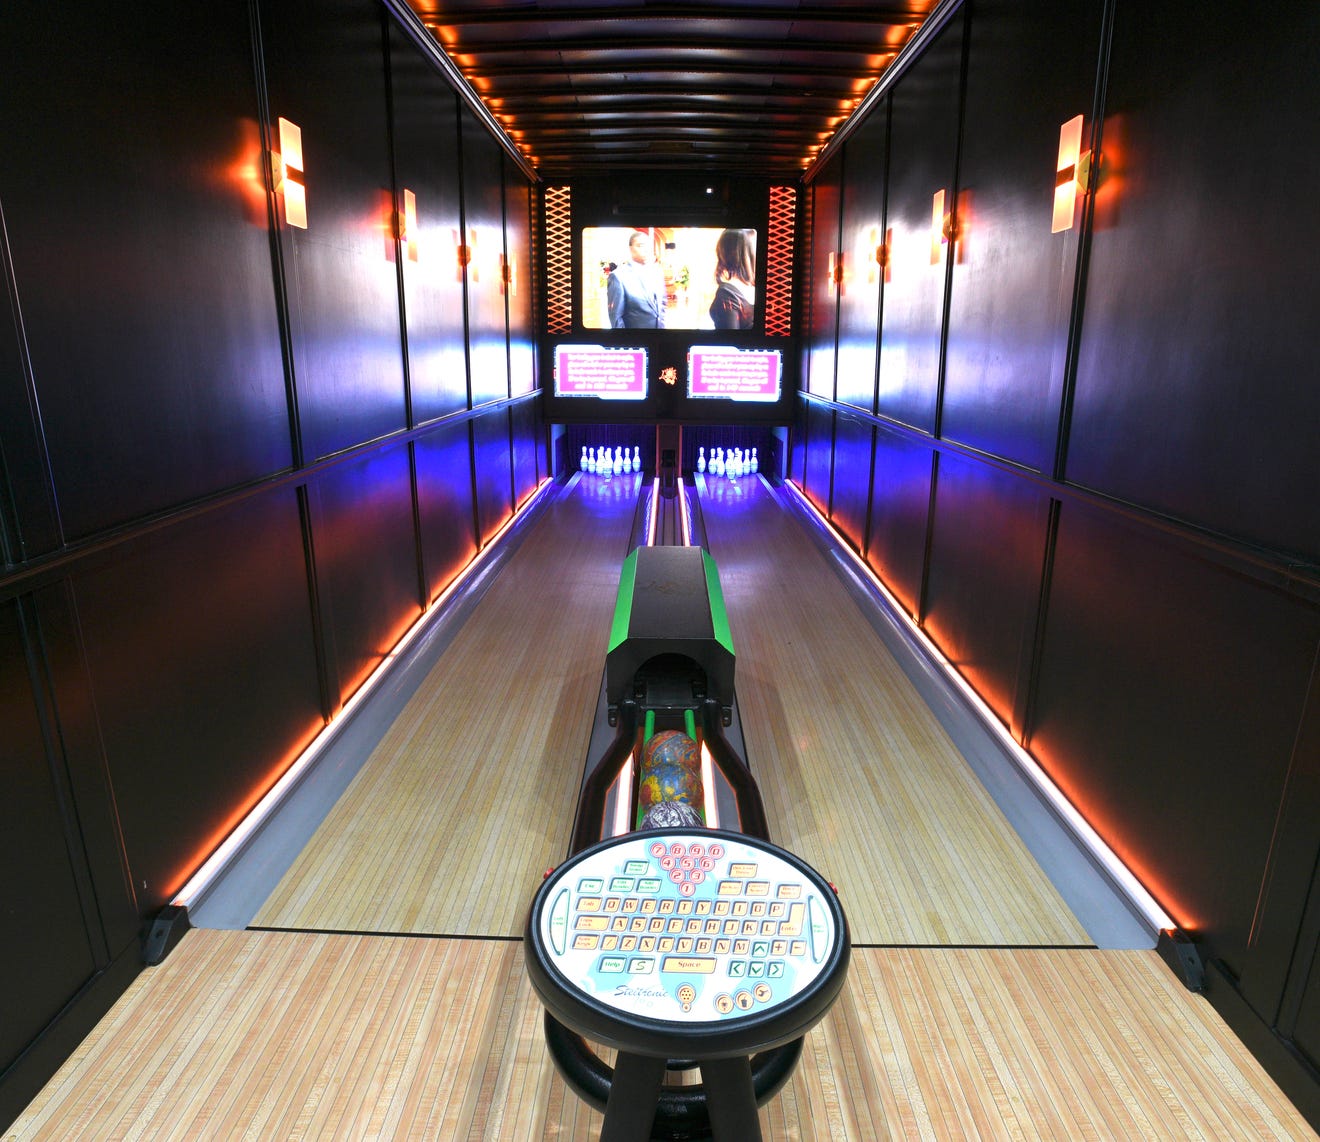 Luxury Strike Bowling  The World's First Mobile Bowling Alley & Lounge!